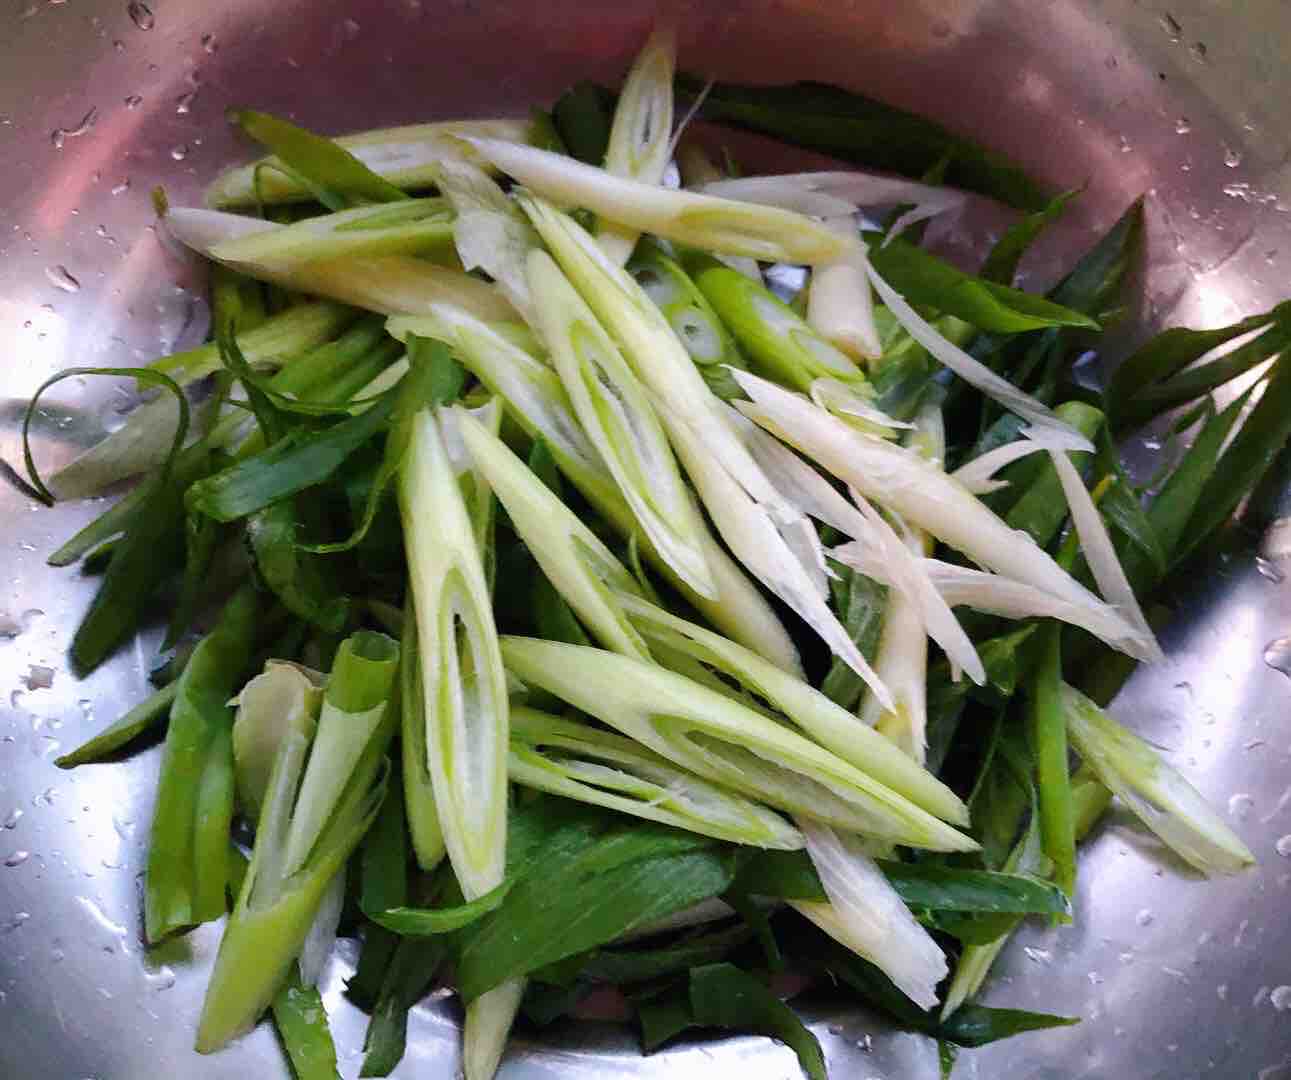 Stir-fried Lamb Slices with Scallions recipe